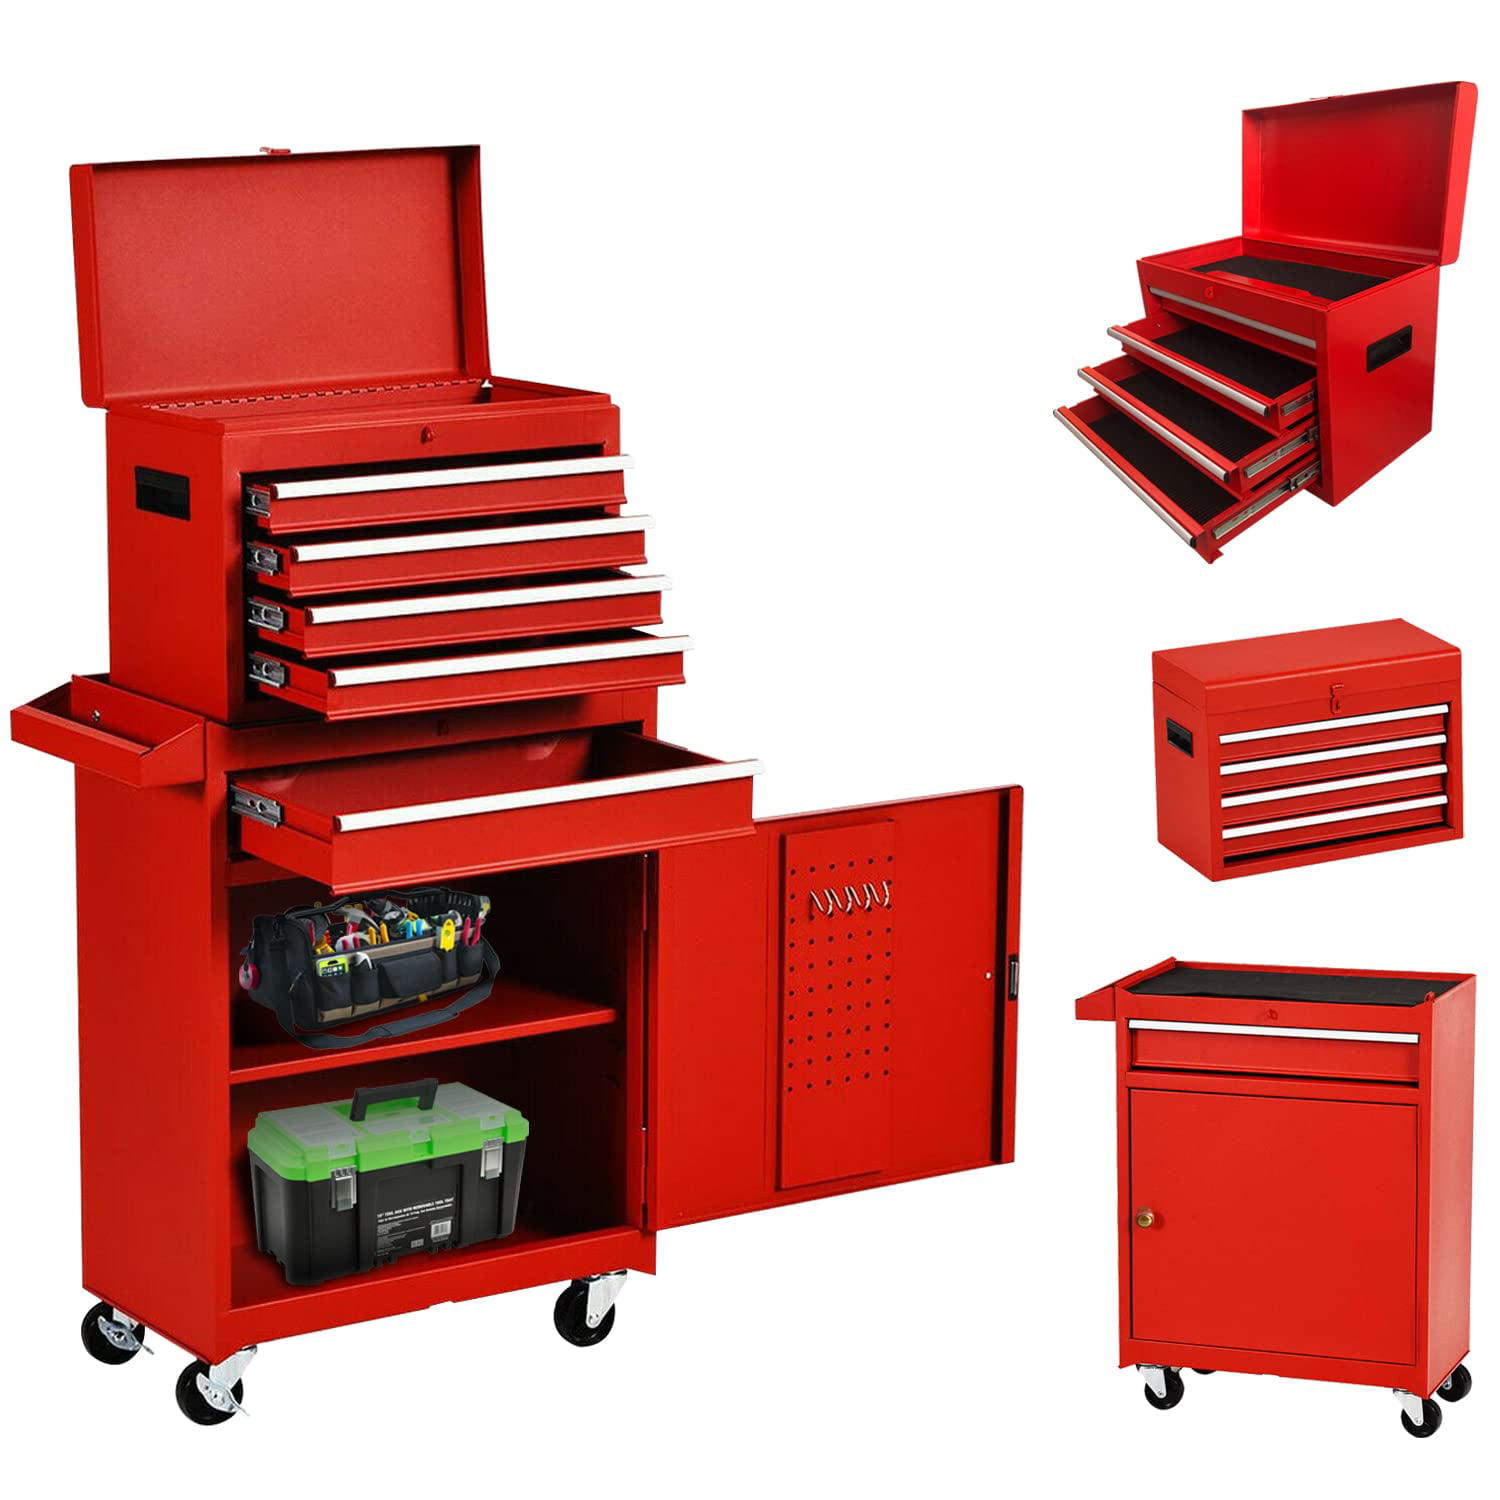 Red & Black Mobile Lockable Toolbox for Workshop Mechanics Garage 2 in 1 Tool Chest & Cabinet Storage Tool Box Rolling Garage Toolbox Organizer with Top Chest and Sliding Drawers 